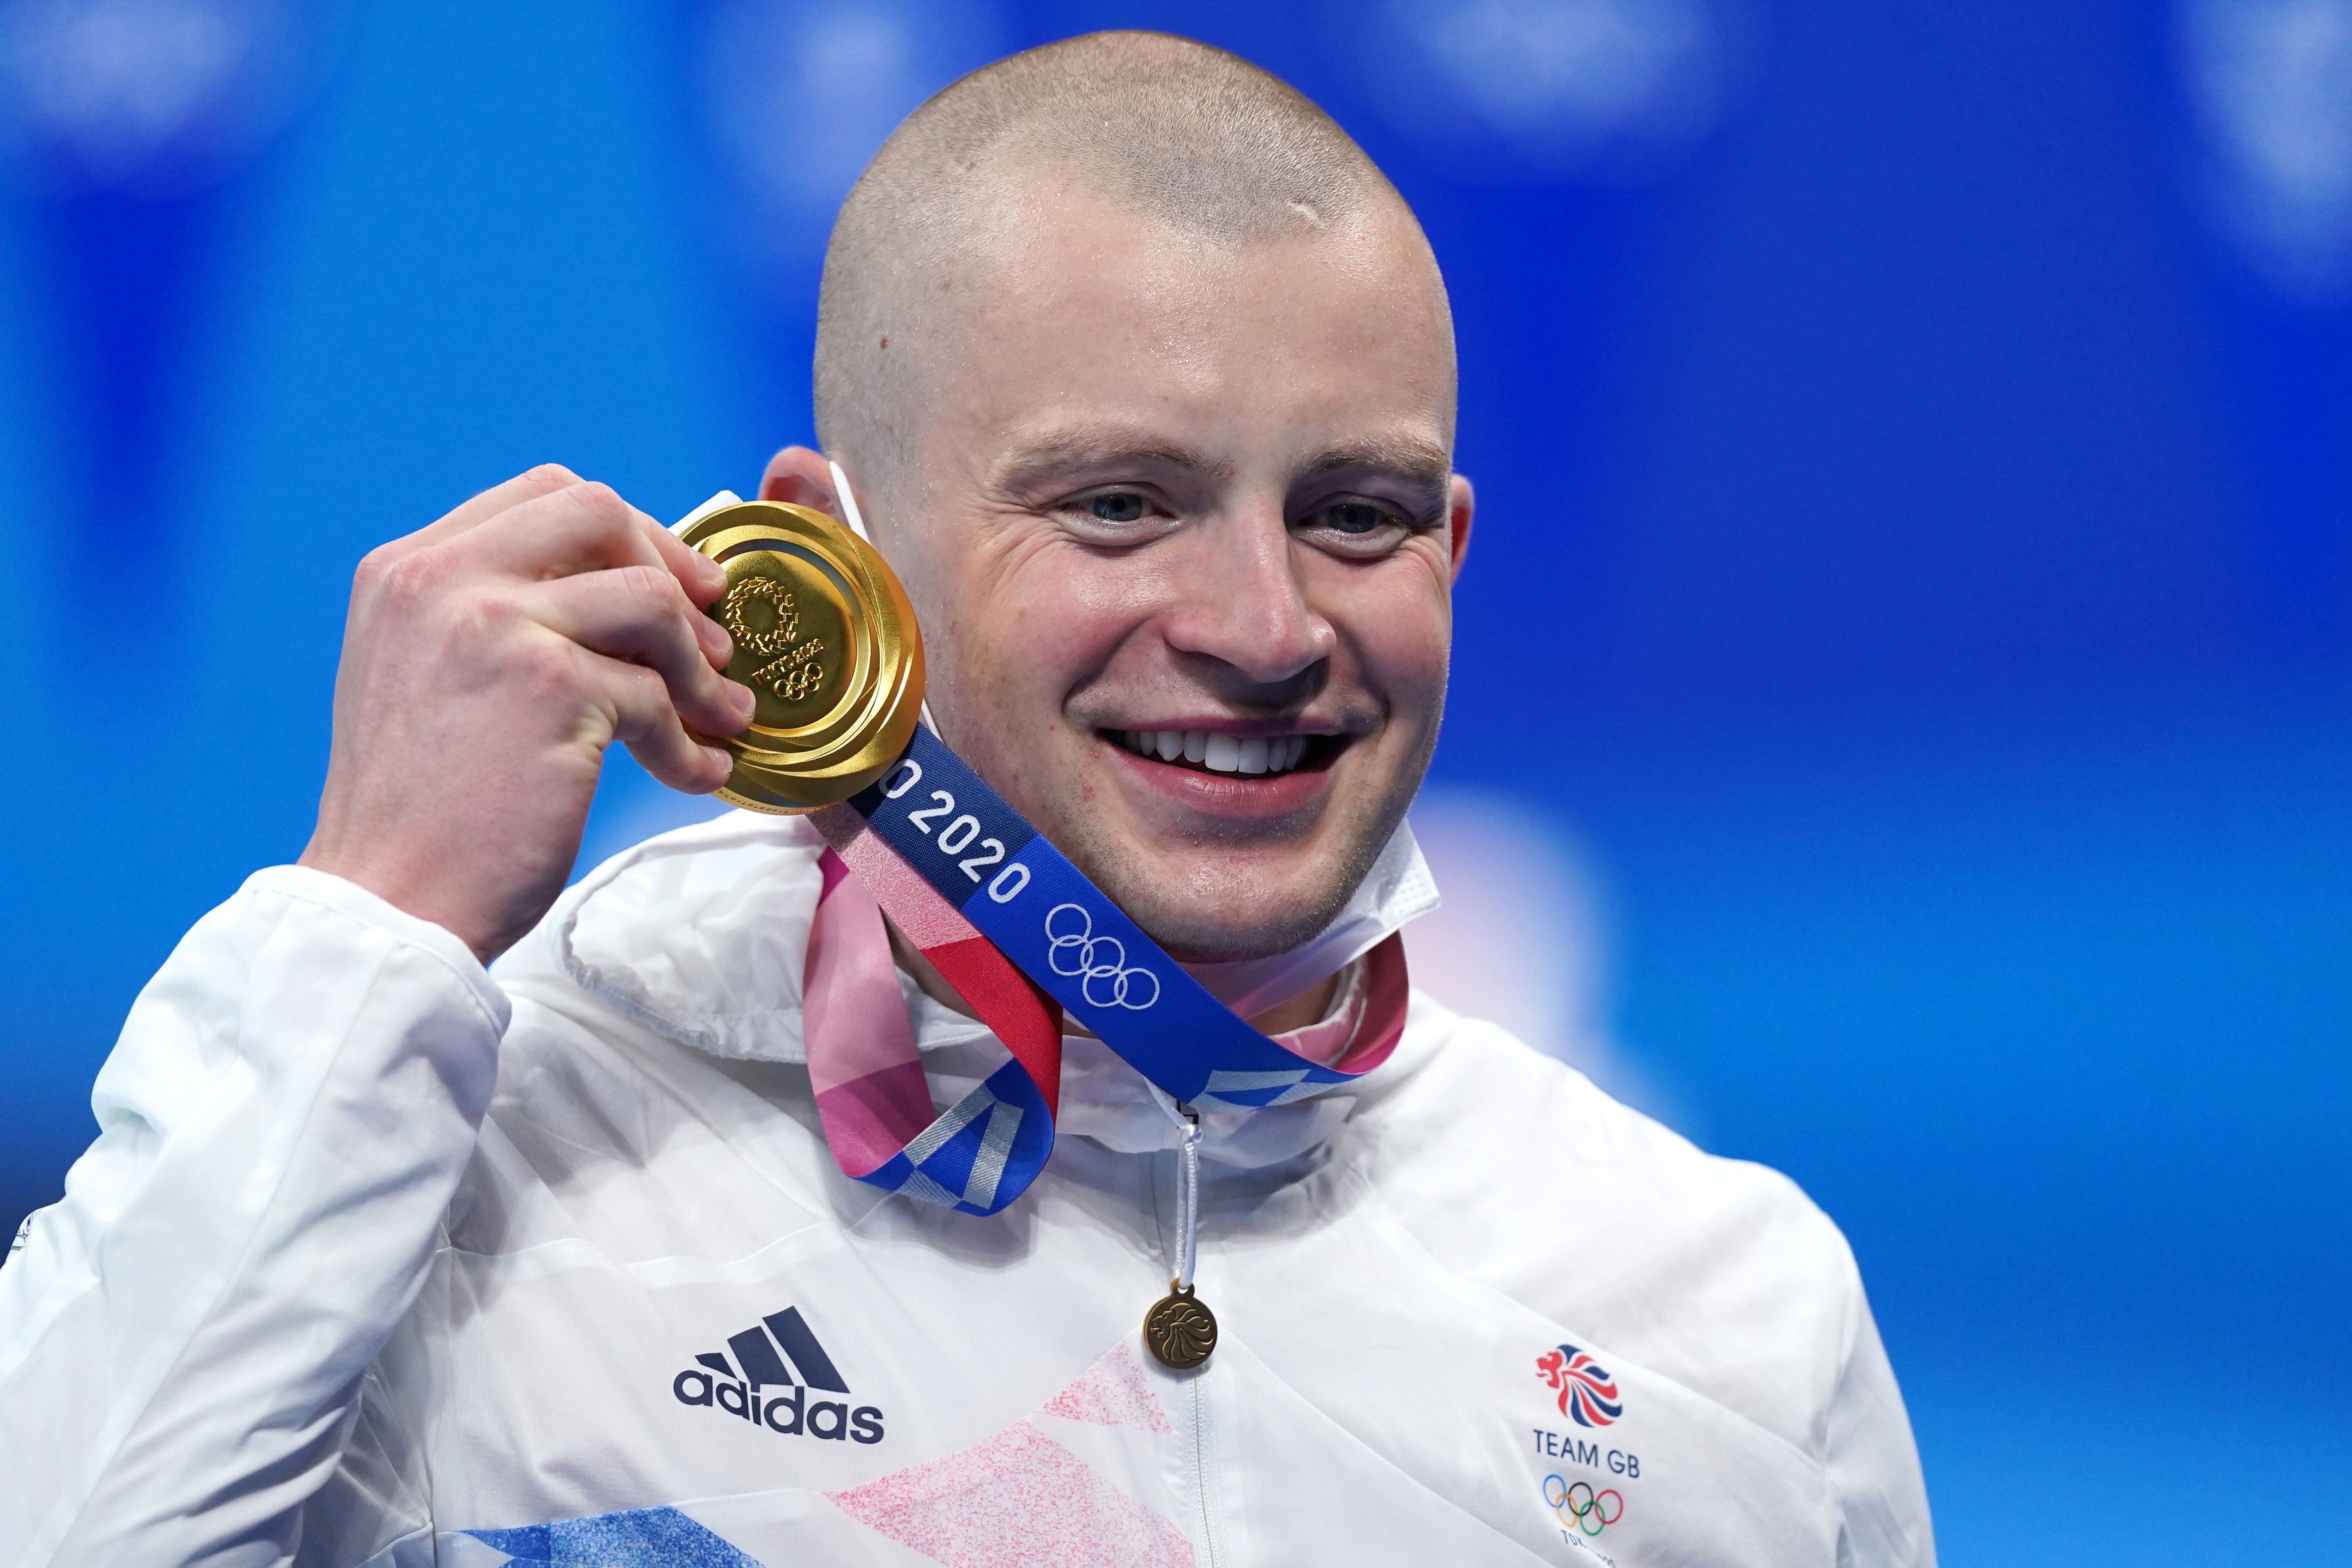 Winning Gold Medals Wont Fix My Problems Says Adam Peaty The Independent